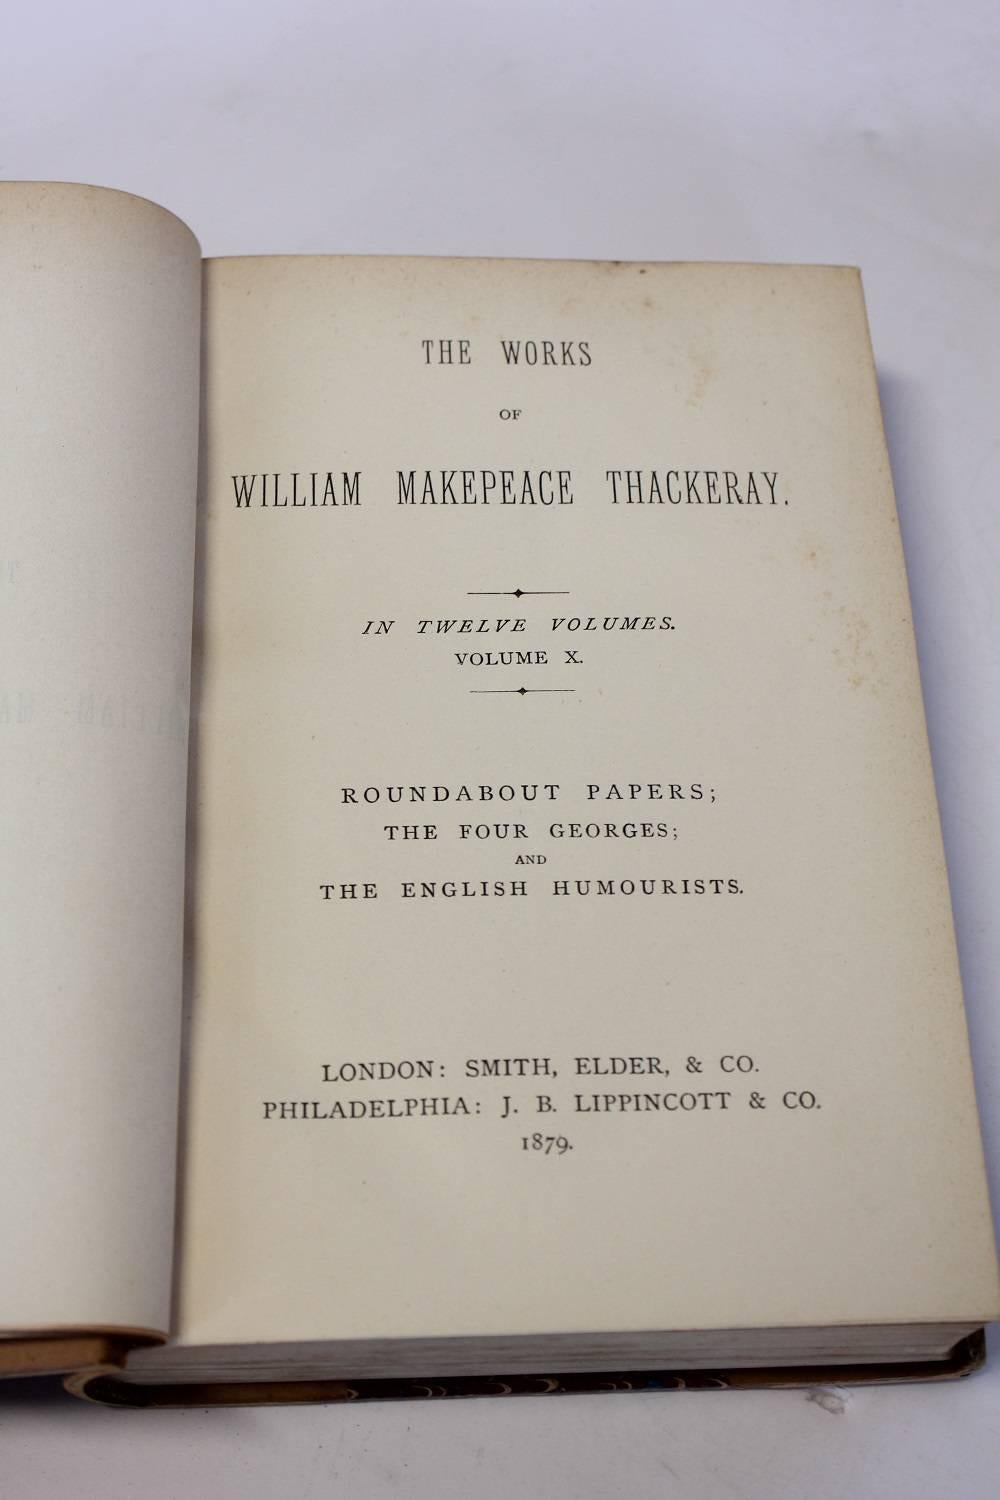 Collection of ten leather volumes of the works of William Makepeace Thackeray. Printed in 1879 by Smith, Elder & Co.